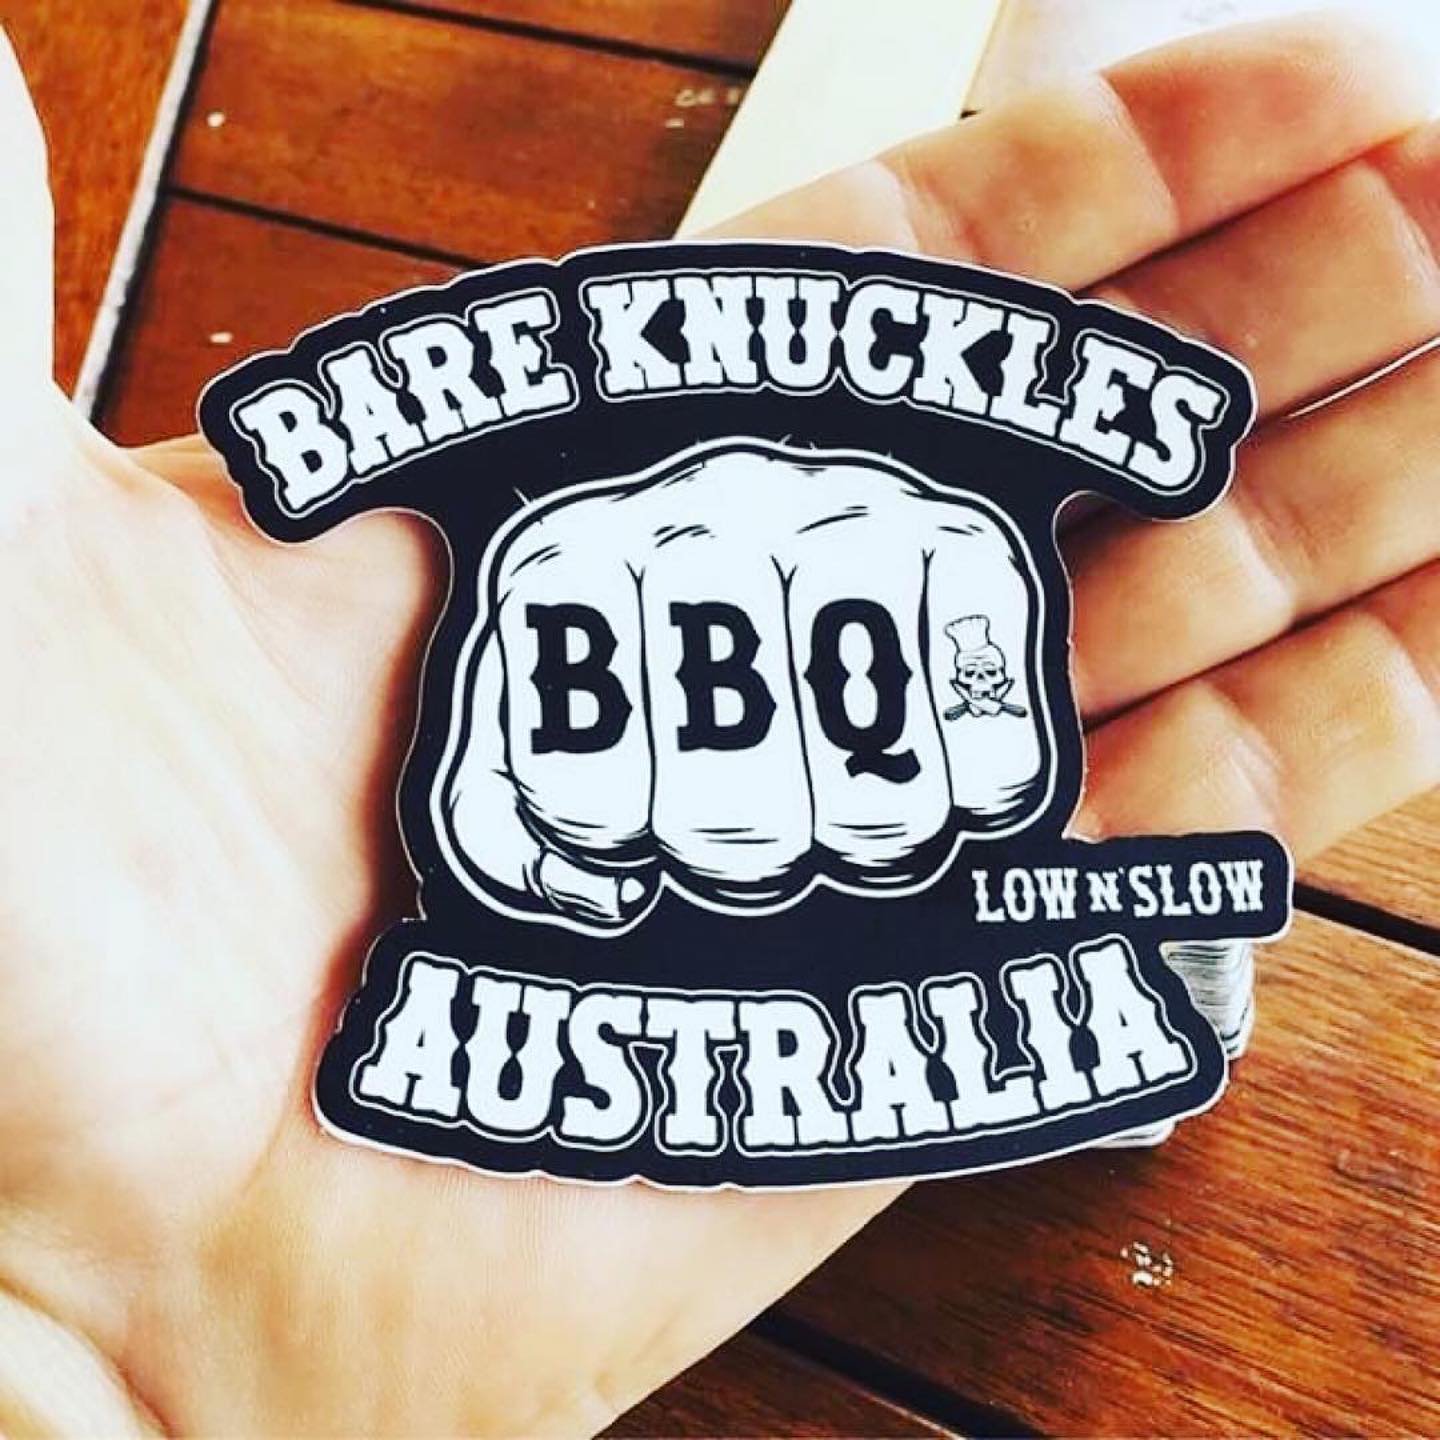 “BBQ STICKER SWAPS” for the ‘United Wall of Que’ - I’m down for it if you are.. Post to Bare Knuckles BBQ, P.O. Box 531, Carina, Queensland, Australia, 4152 - include your return address and I’ll hit you back with one of mine !! 🏻 - Get On It !!